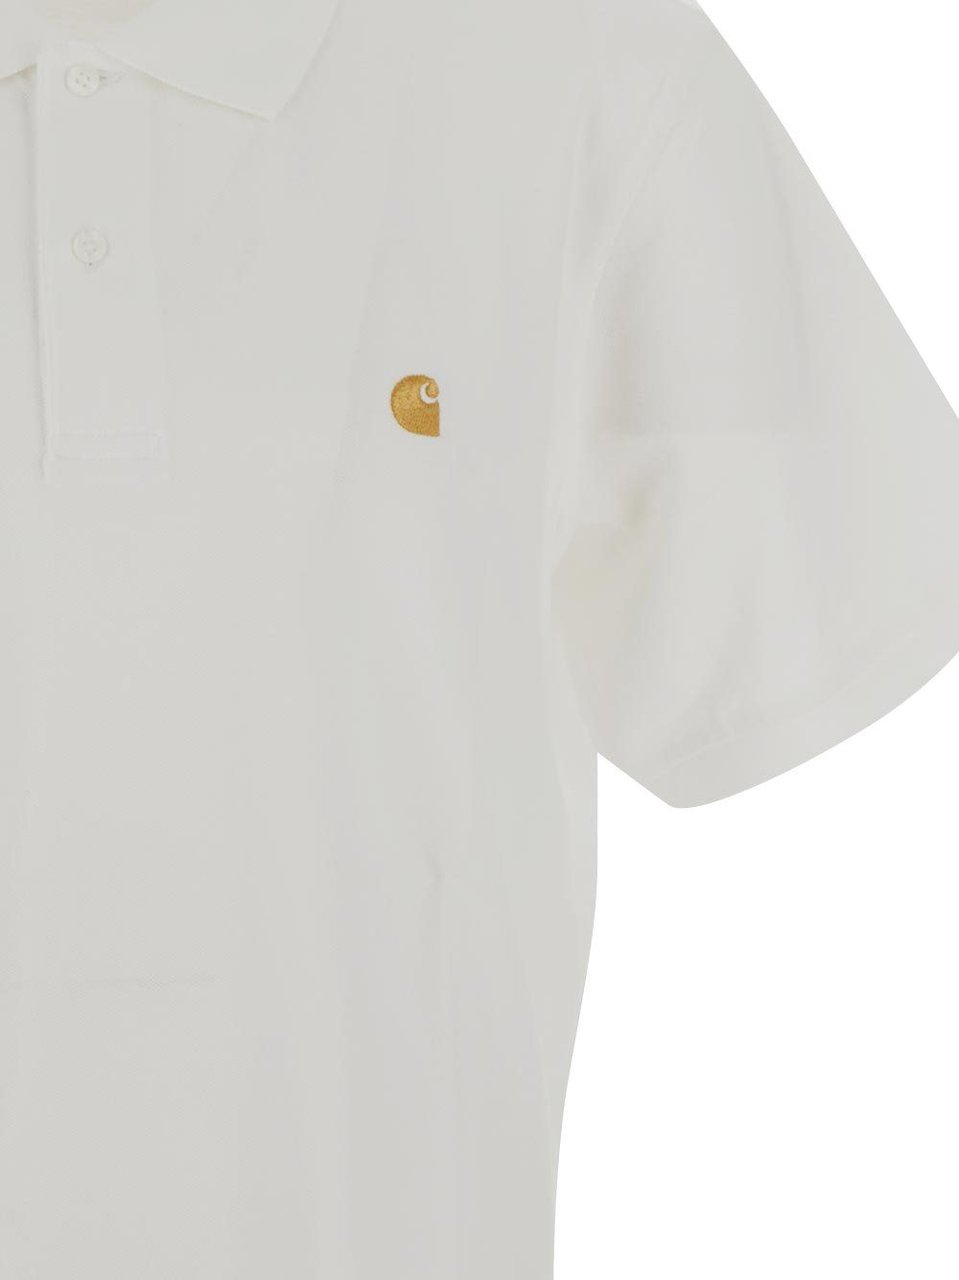 Carhartt Wip S/s Chase Pique White Polo Shirt White Wit